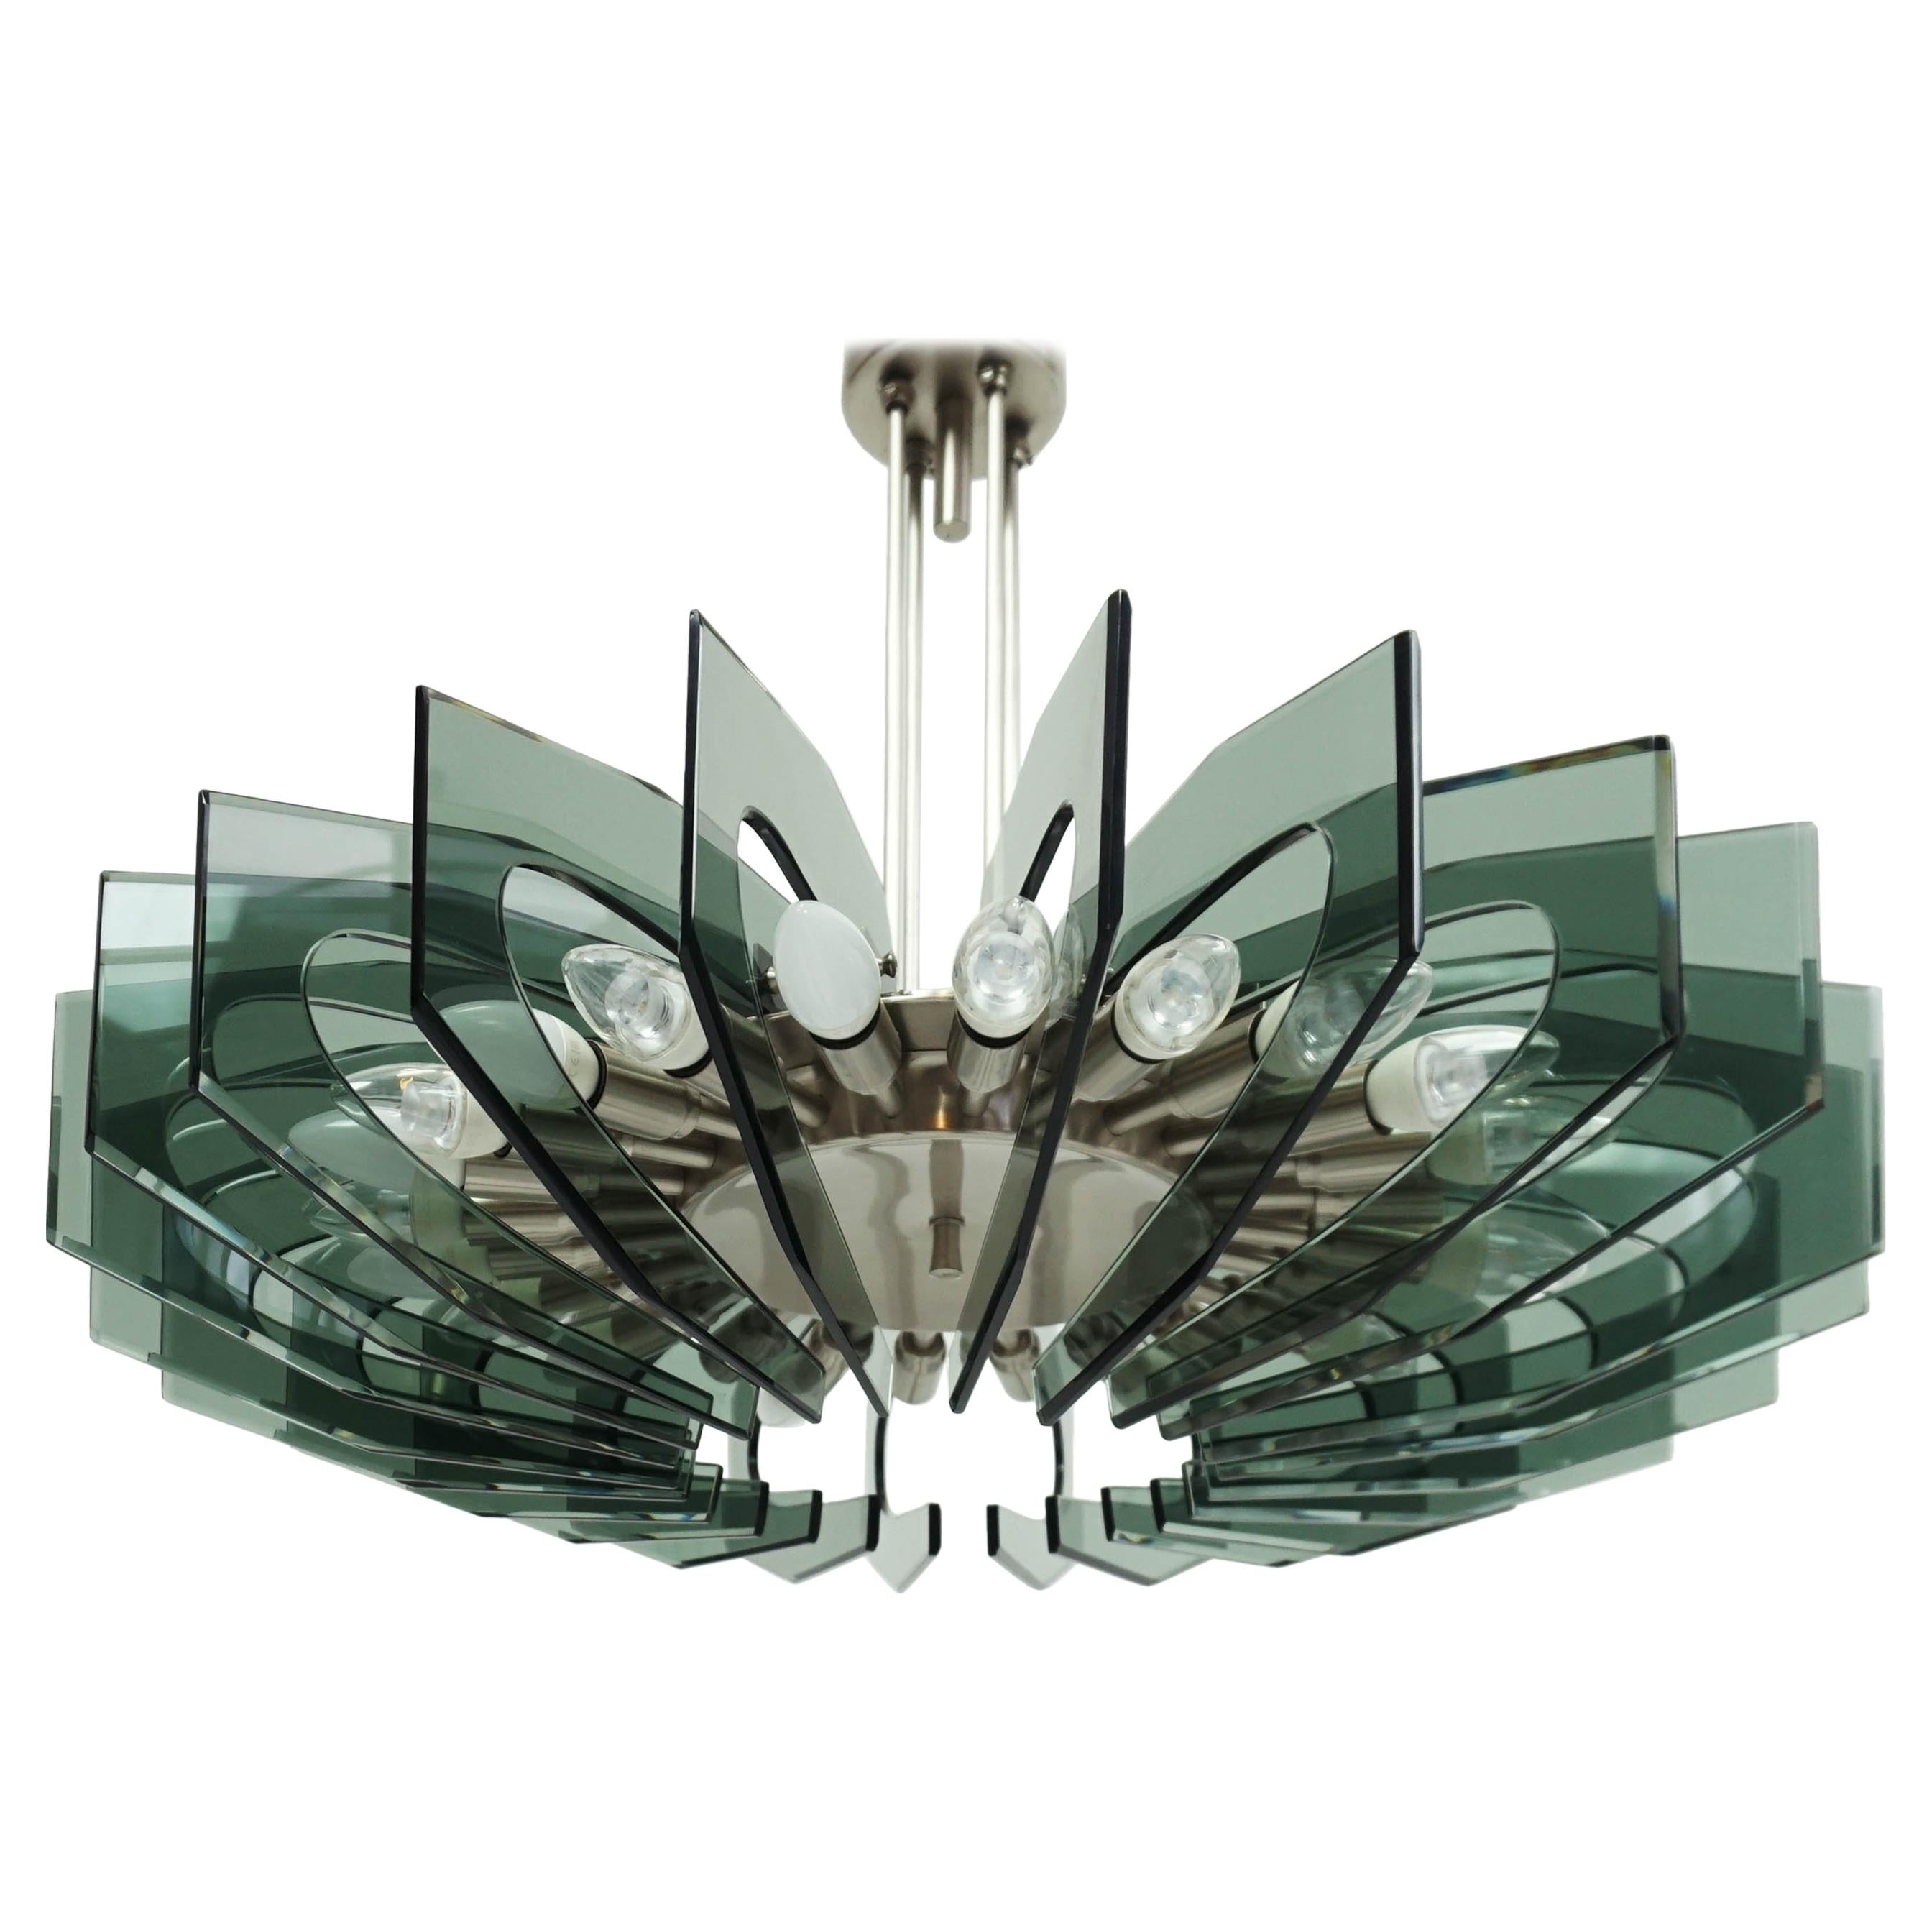 Stunning Chandelier in Colored Glass, Fontana Arte style, circa 1950, Italy